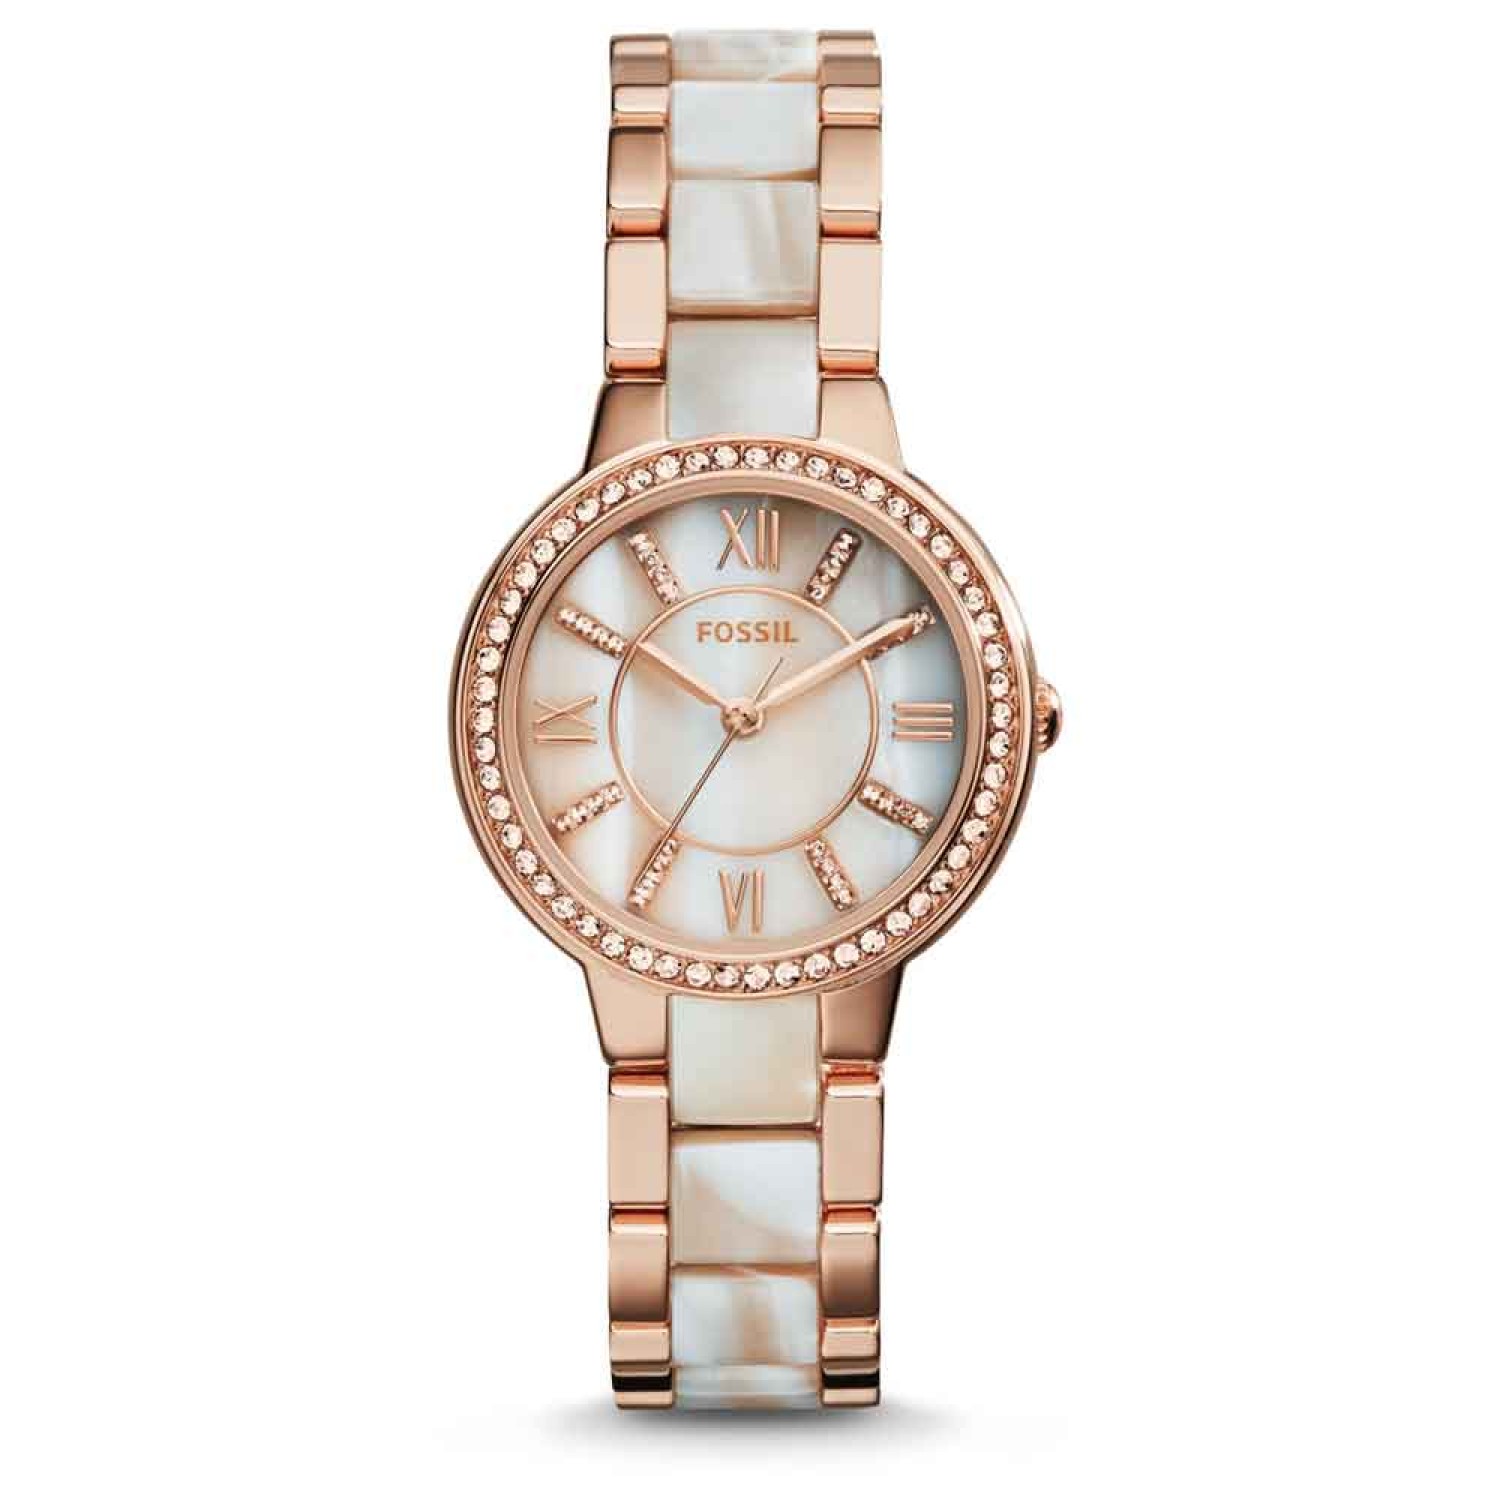 ES3716 Fossil Virginia Rose-Tone & Horn Acetate Stainless Steel Watch. Fossil are revamping the seasons classics with clean silhouettes and time-honoured materials. Exquisitely crafted in shimmer horn acetate and shiny rose steel, Virginia makes a sta